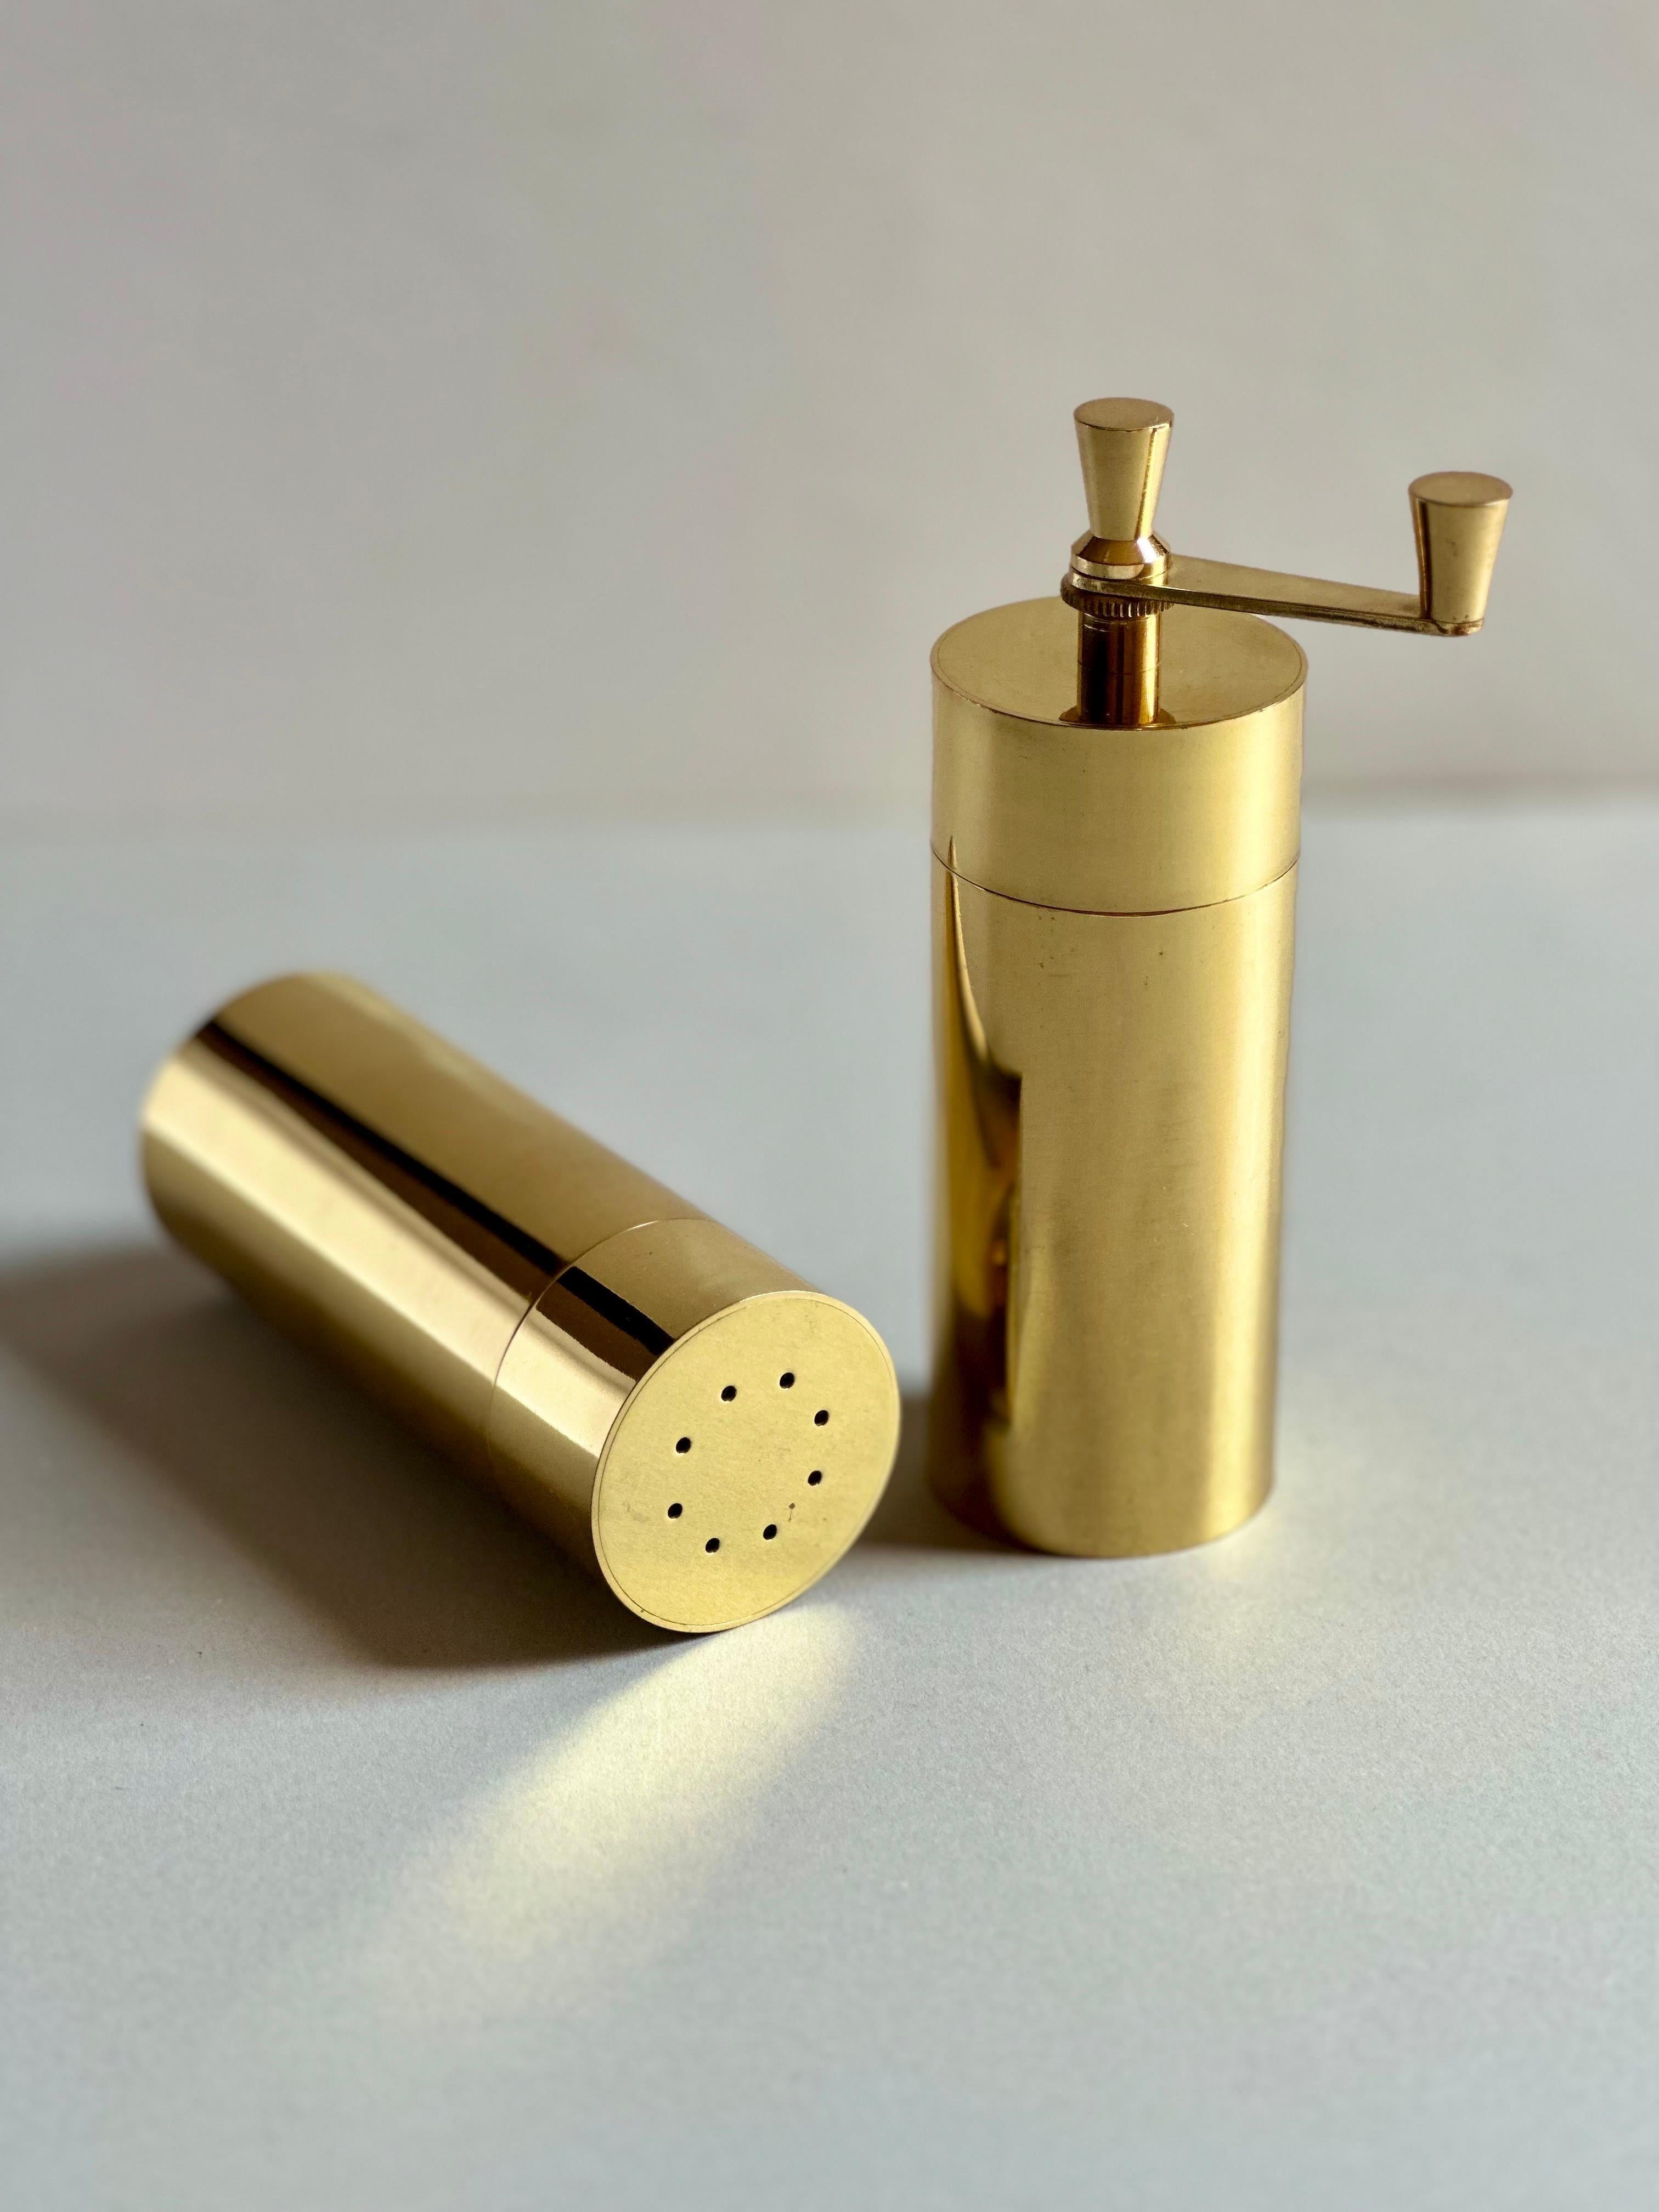 Mid-20th Century Modernist Lacquered Brass Pepper Mill and Salt Shaker, Italy, Original Box, 1960 For Sale